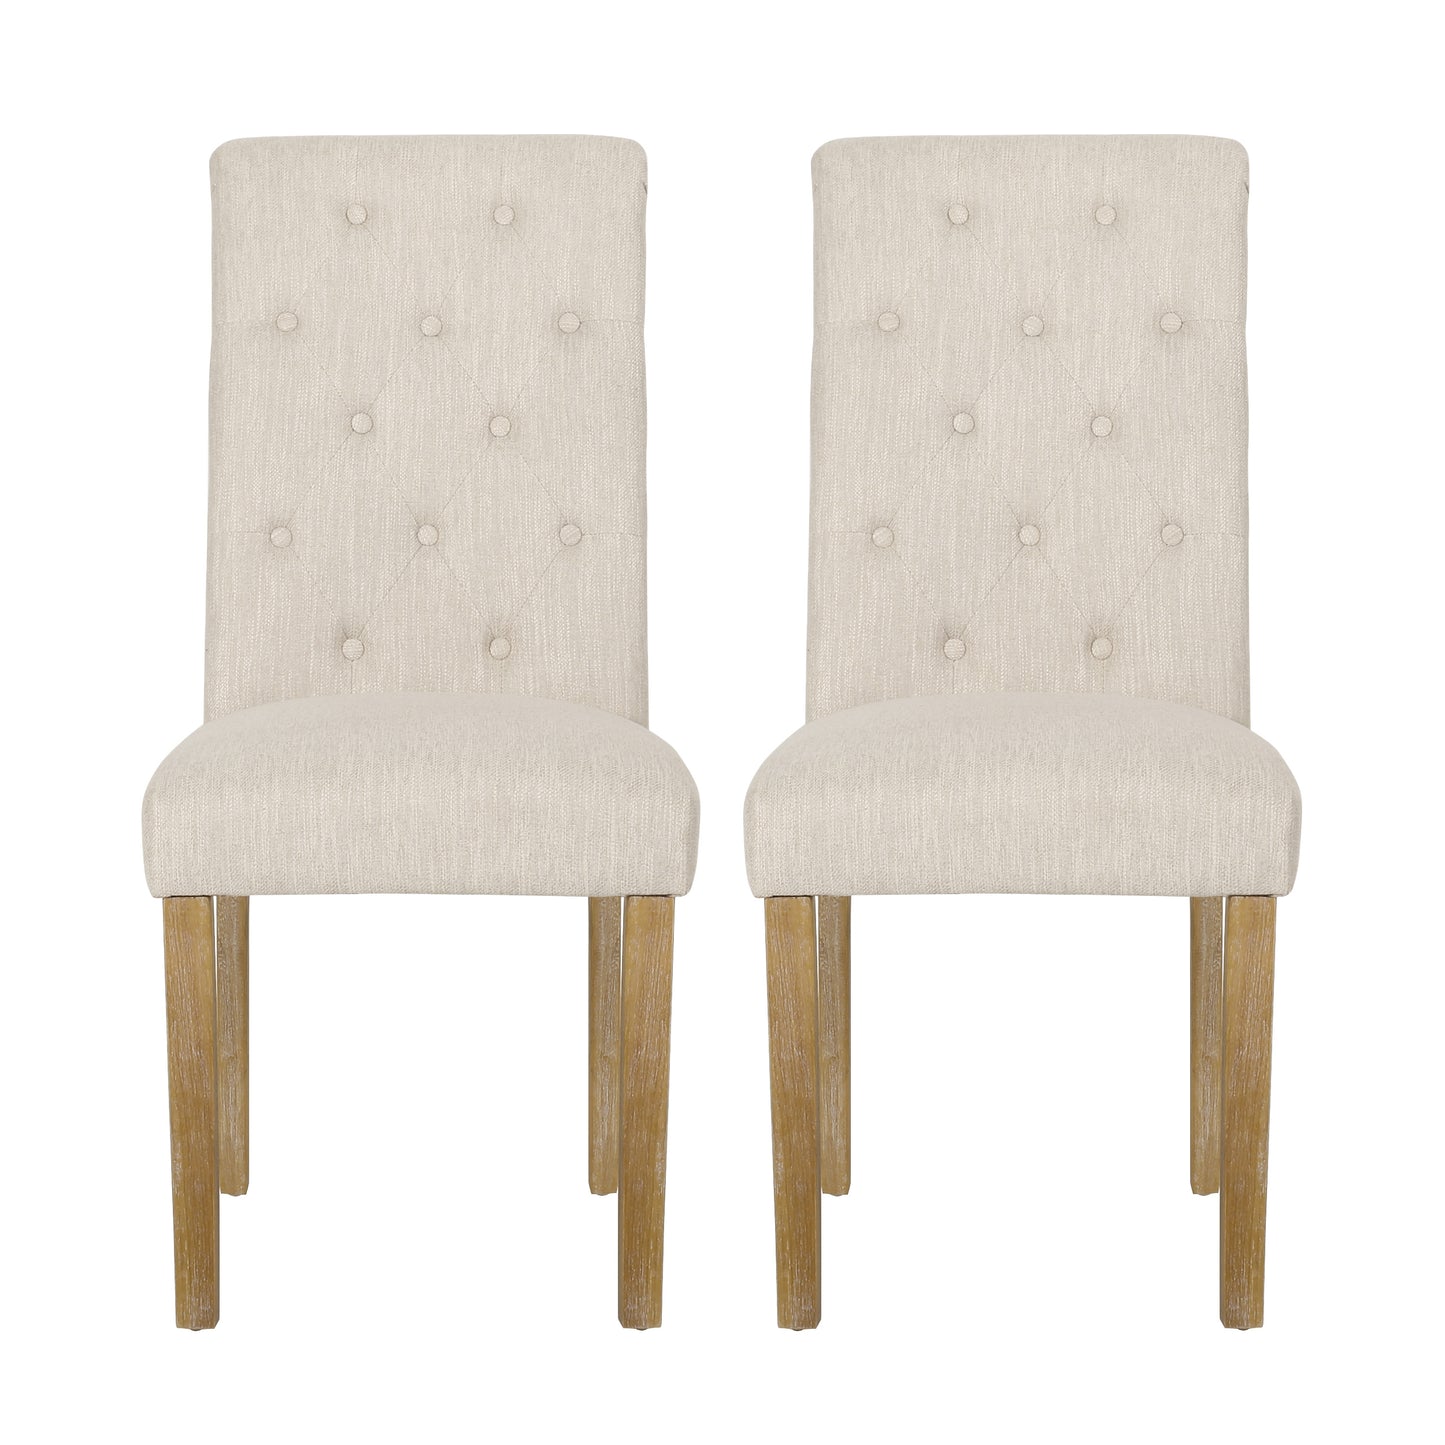 Larkspur Contemporary Fabric Tufted Dining Chairs, Set of 2